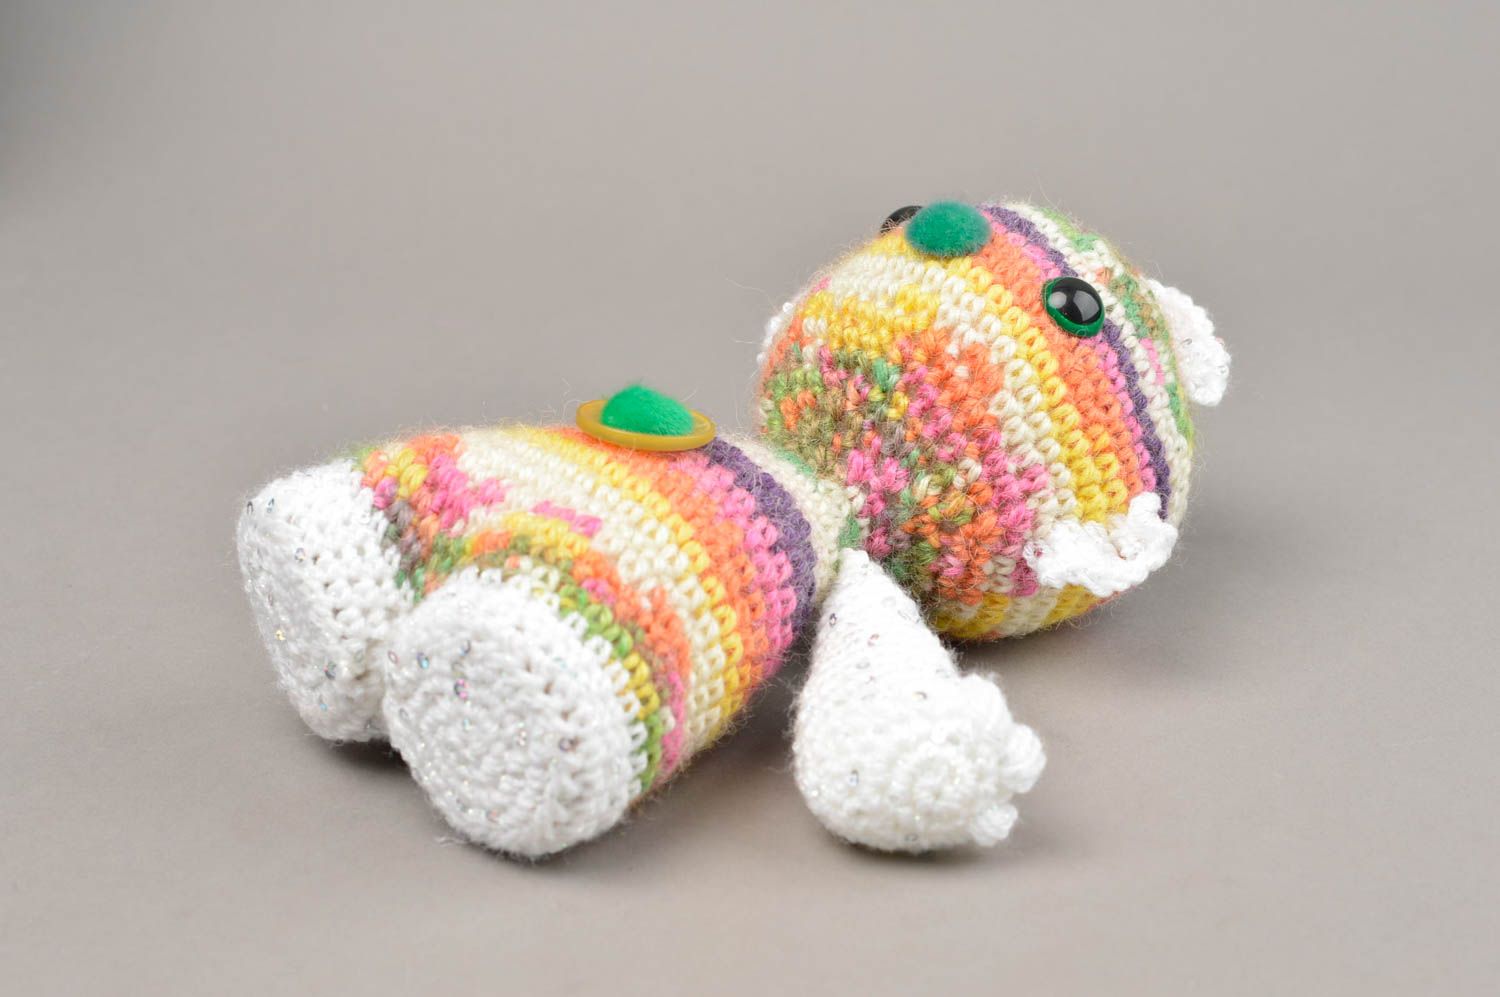 Handmade designer soft toy unusual cute presents for kids crocheted souvenirs photo 3